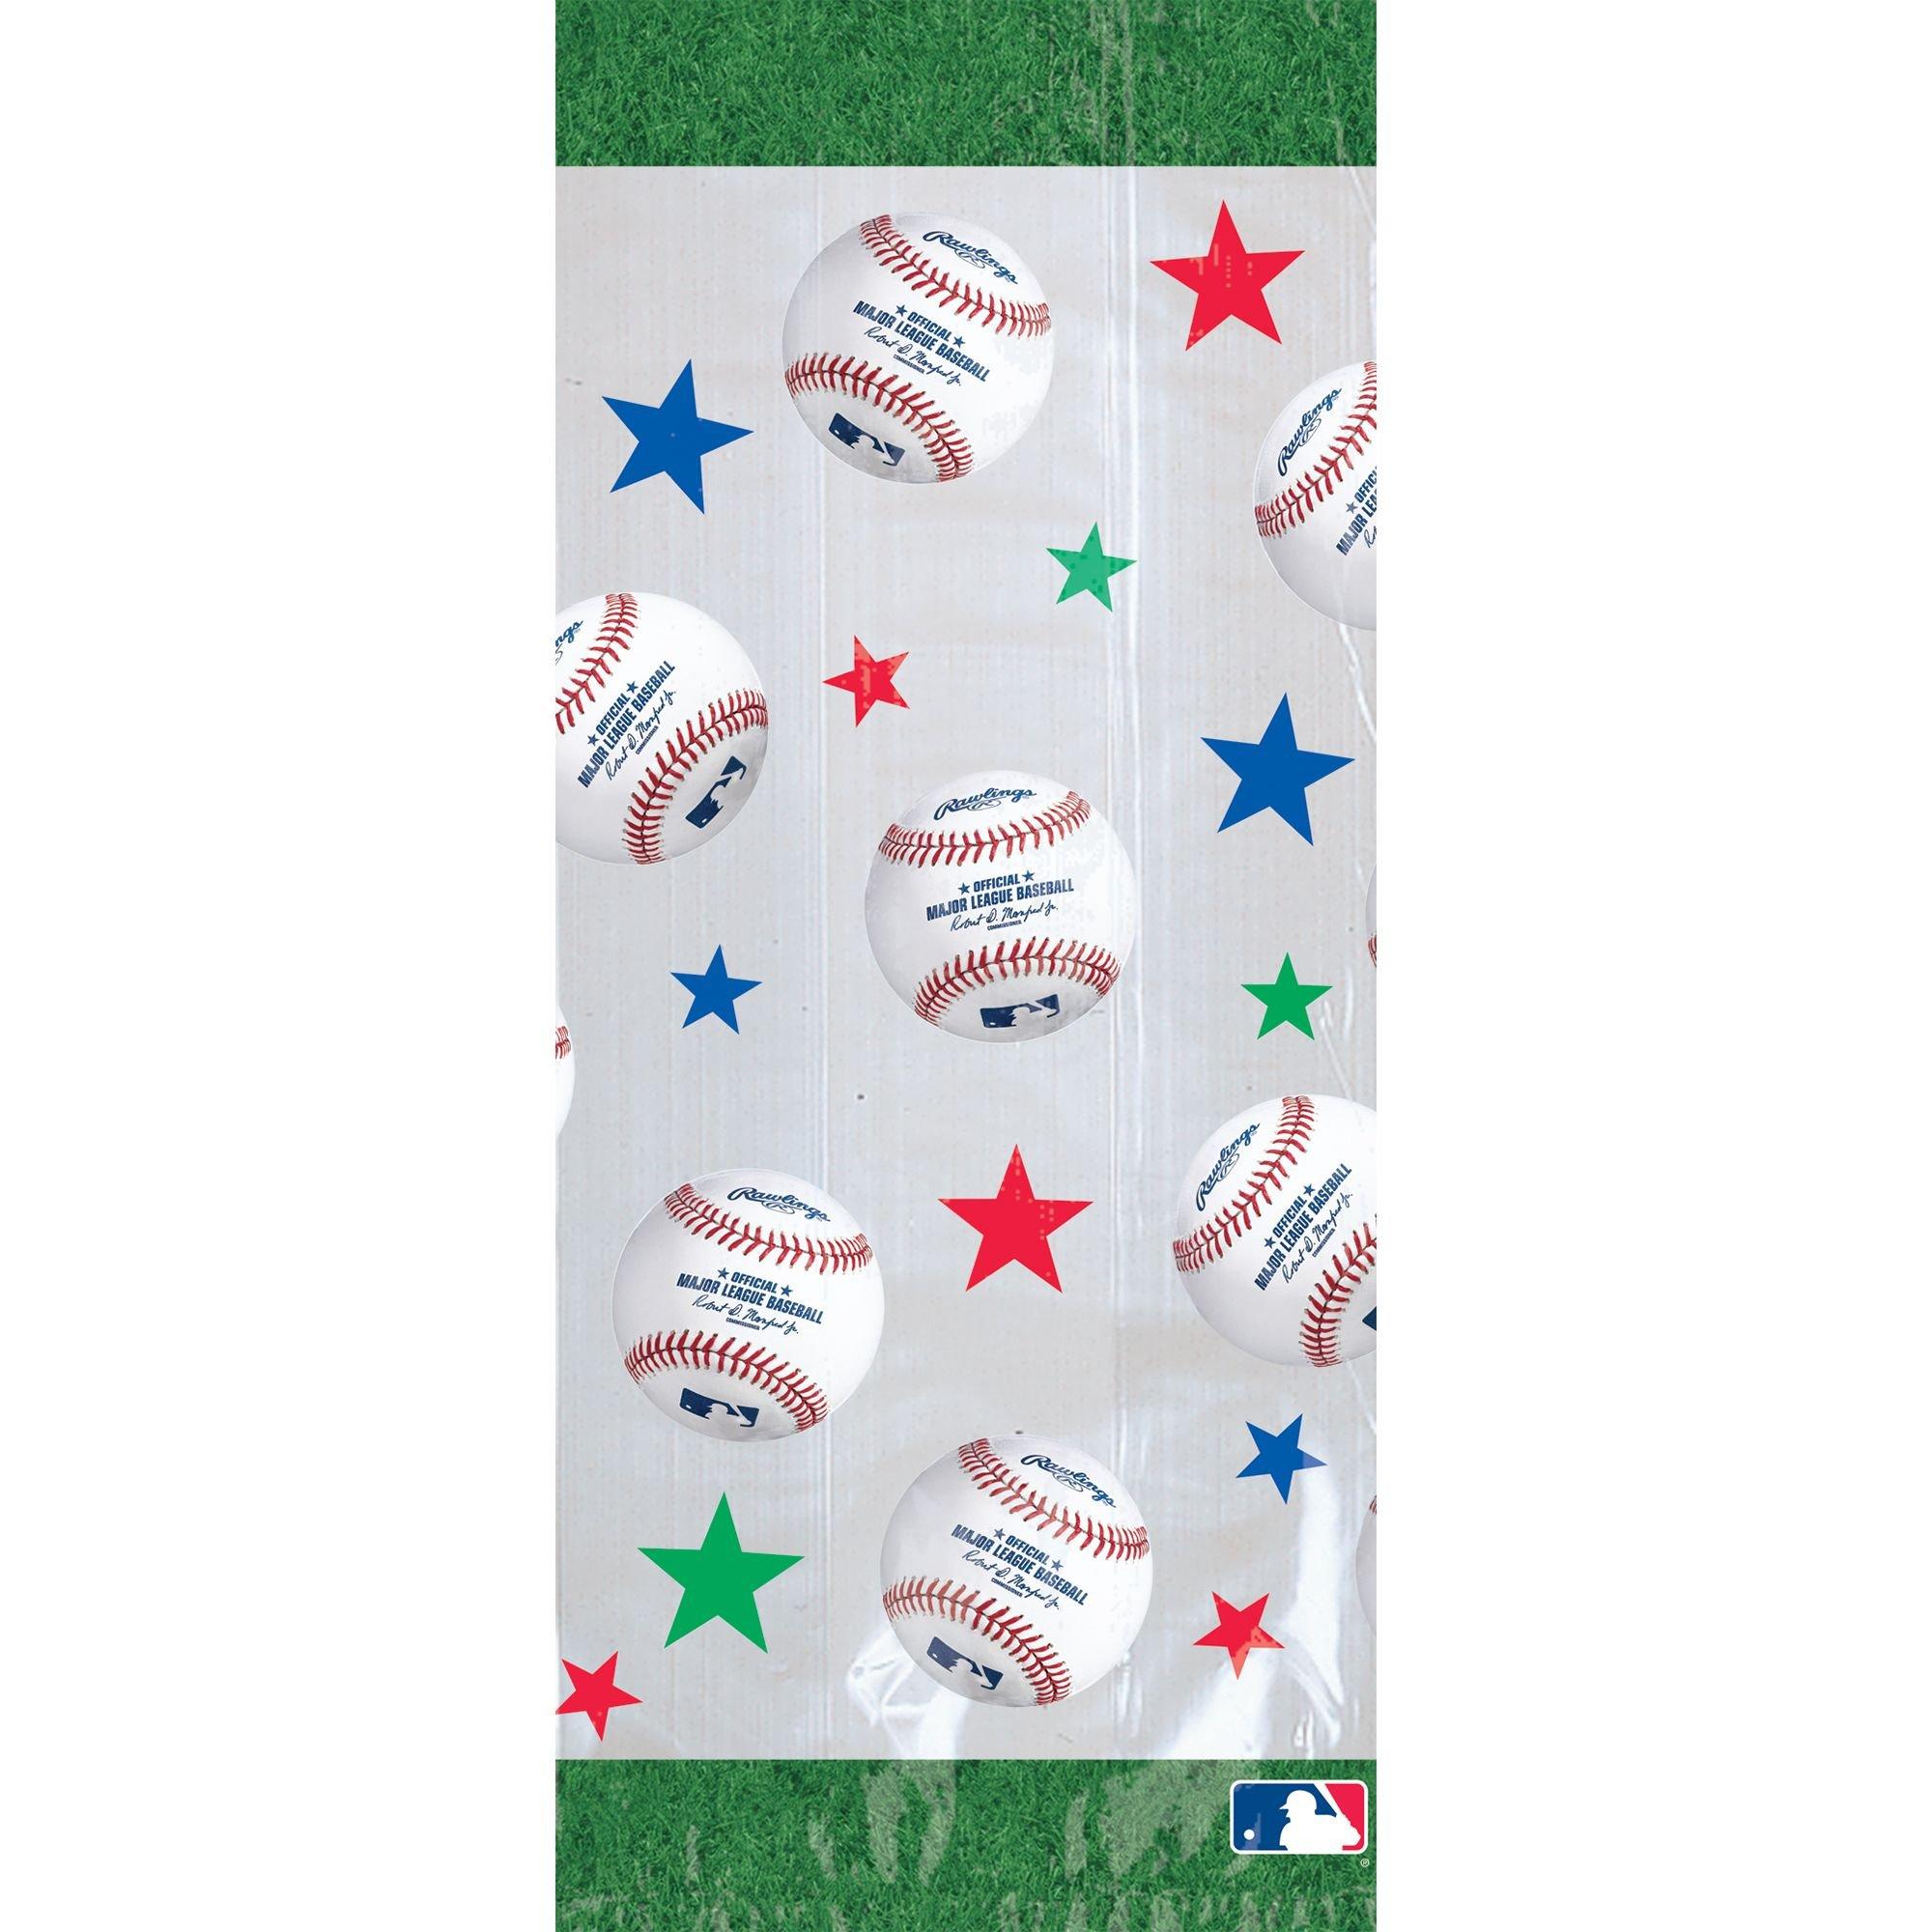 Baseball Cello Party Bags (20 Pack)